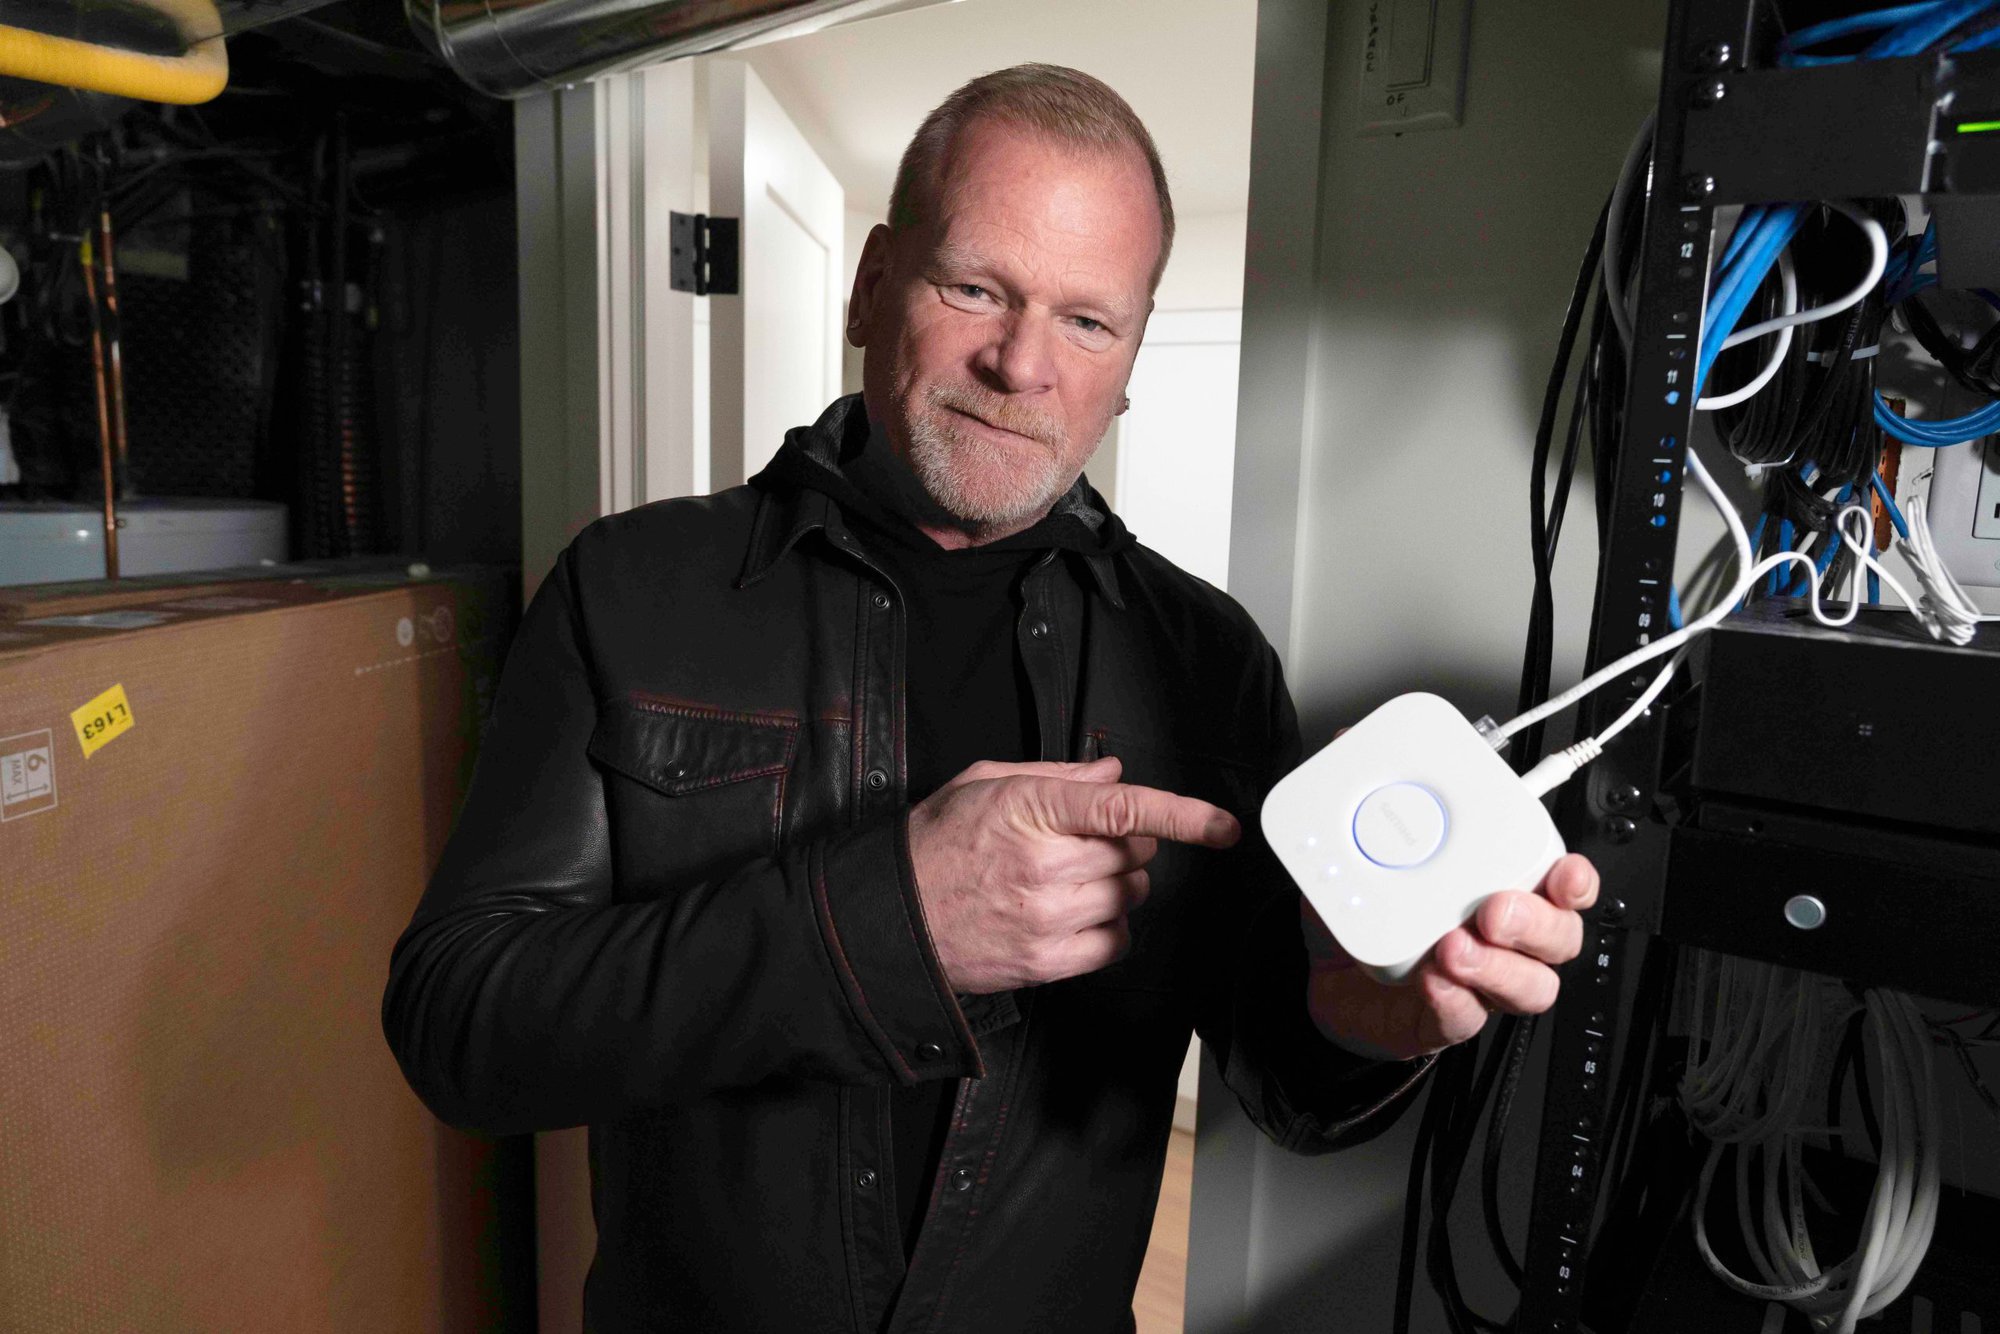 Mike Holmes holding Philips Hue Bridge. Philips Hue Bridge allows you to remotely access and control all your lights from a central location.